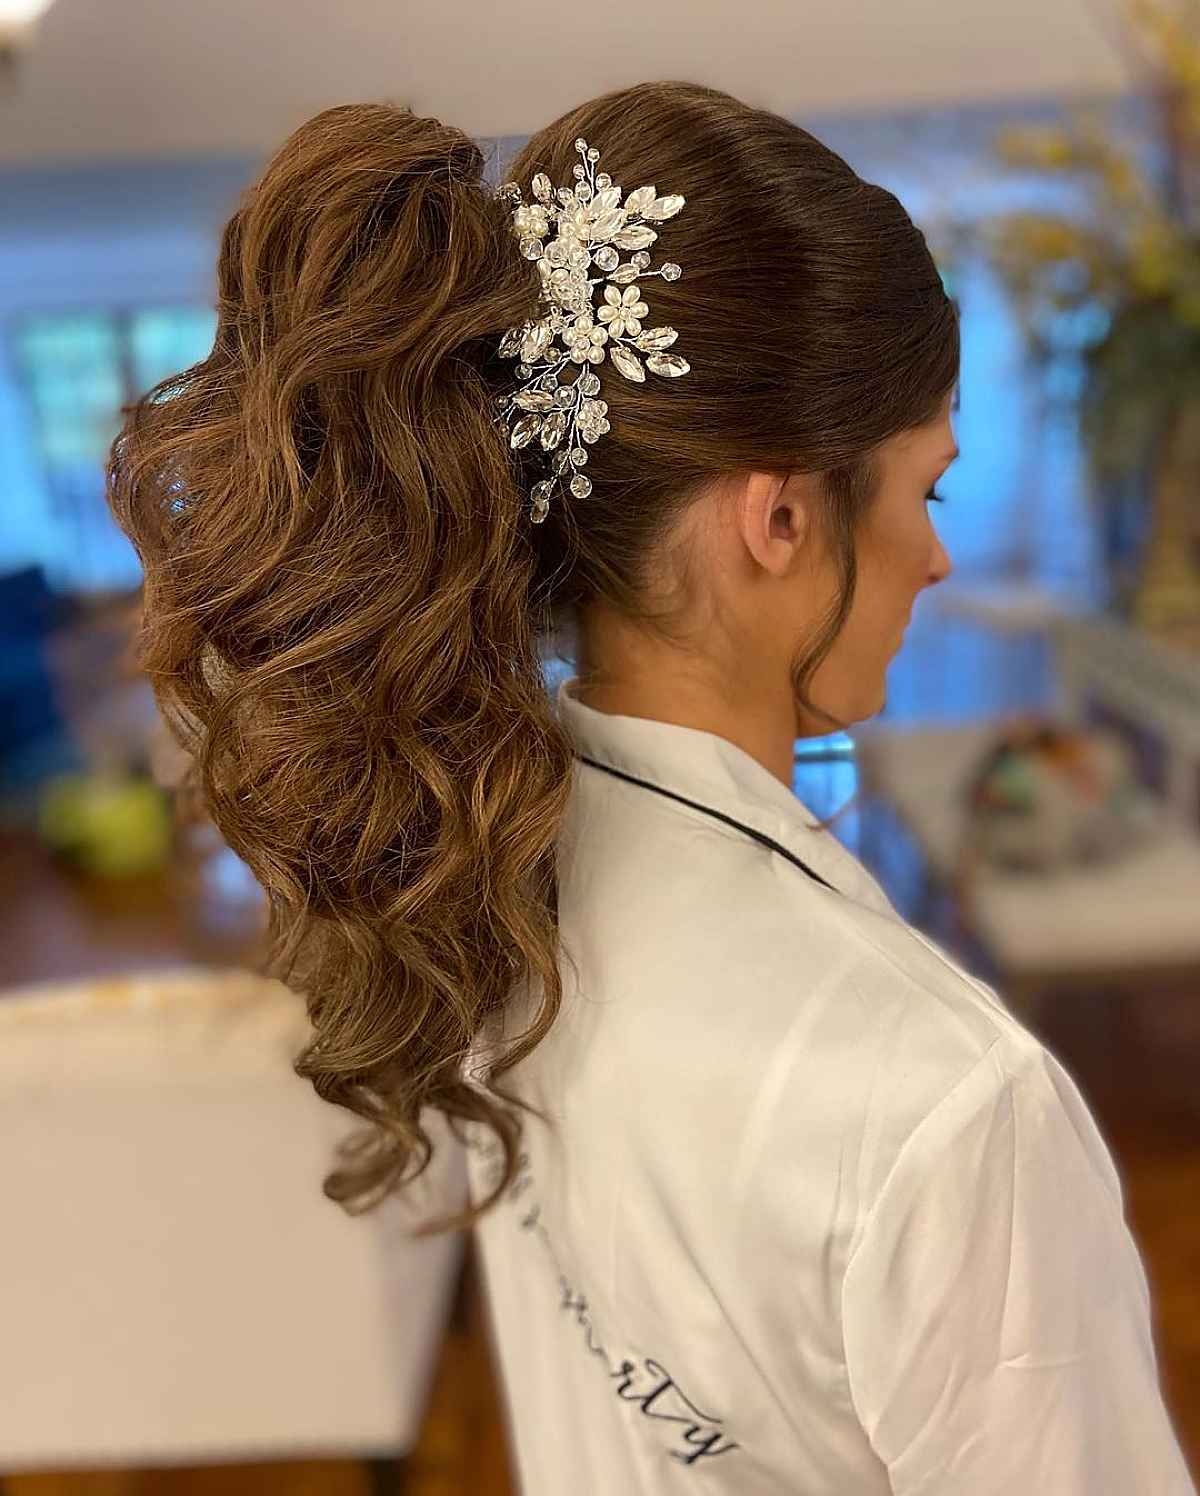 The Best High Ponytail for Prom